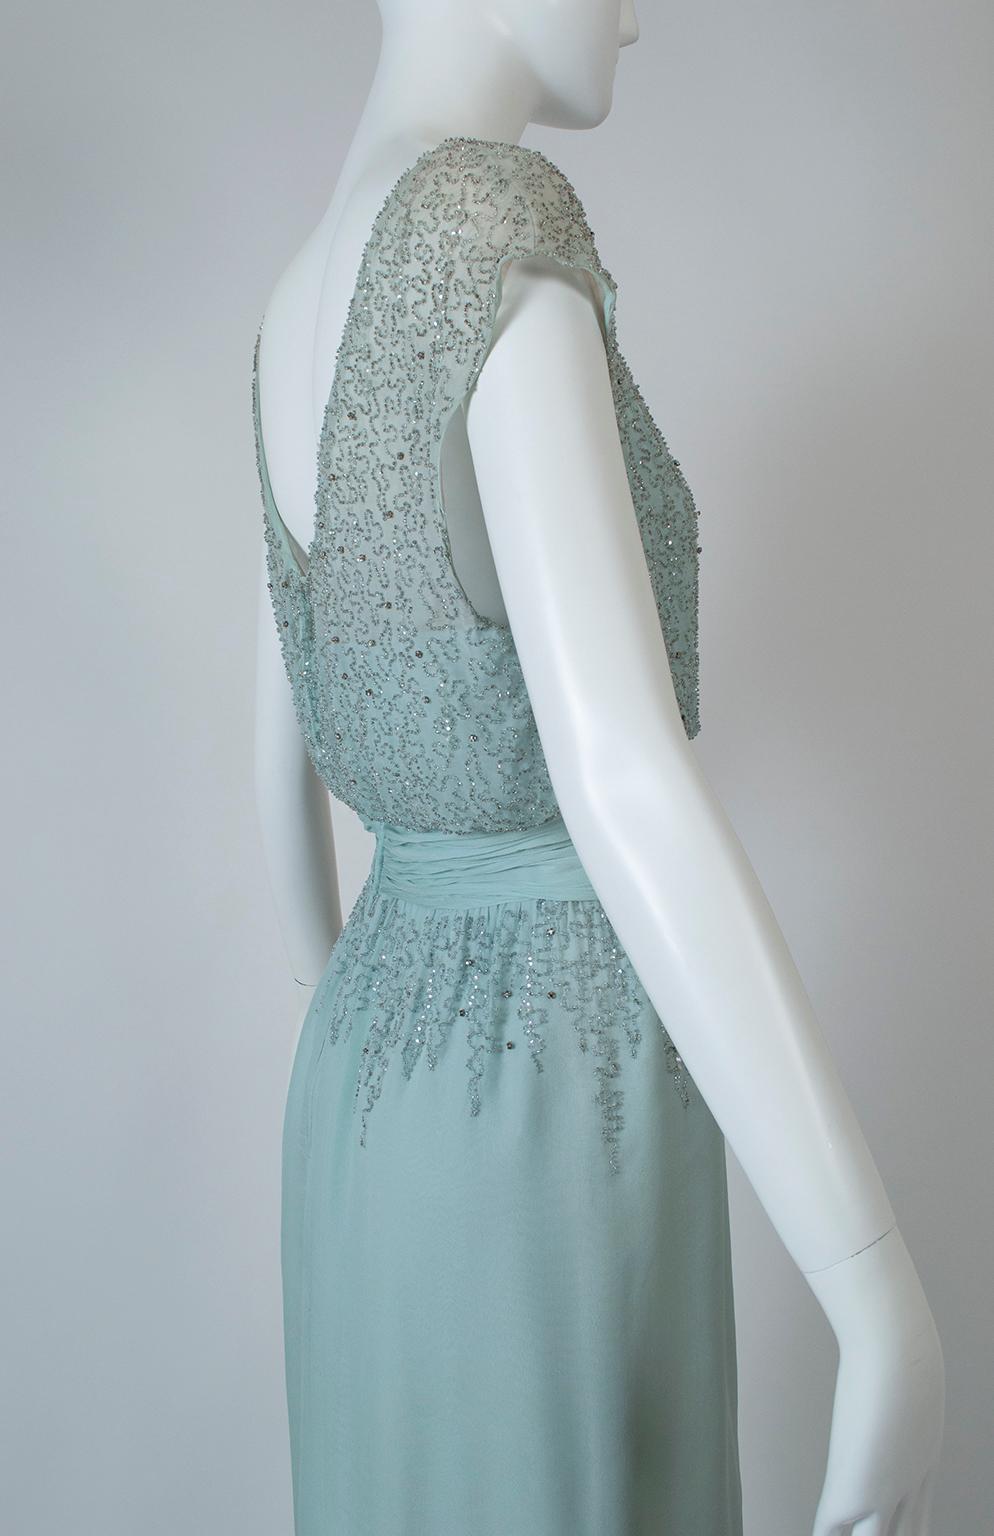 Gray Rudolf Pale Aqua Bead and Crystal Plunge-Back Blouson Cocktail Dress - M, 1950s For Sale